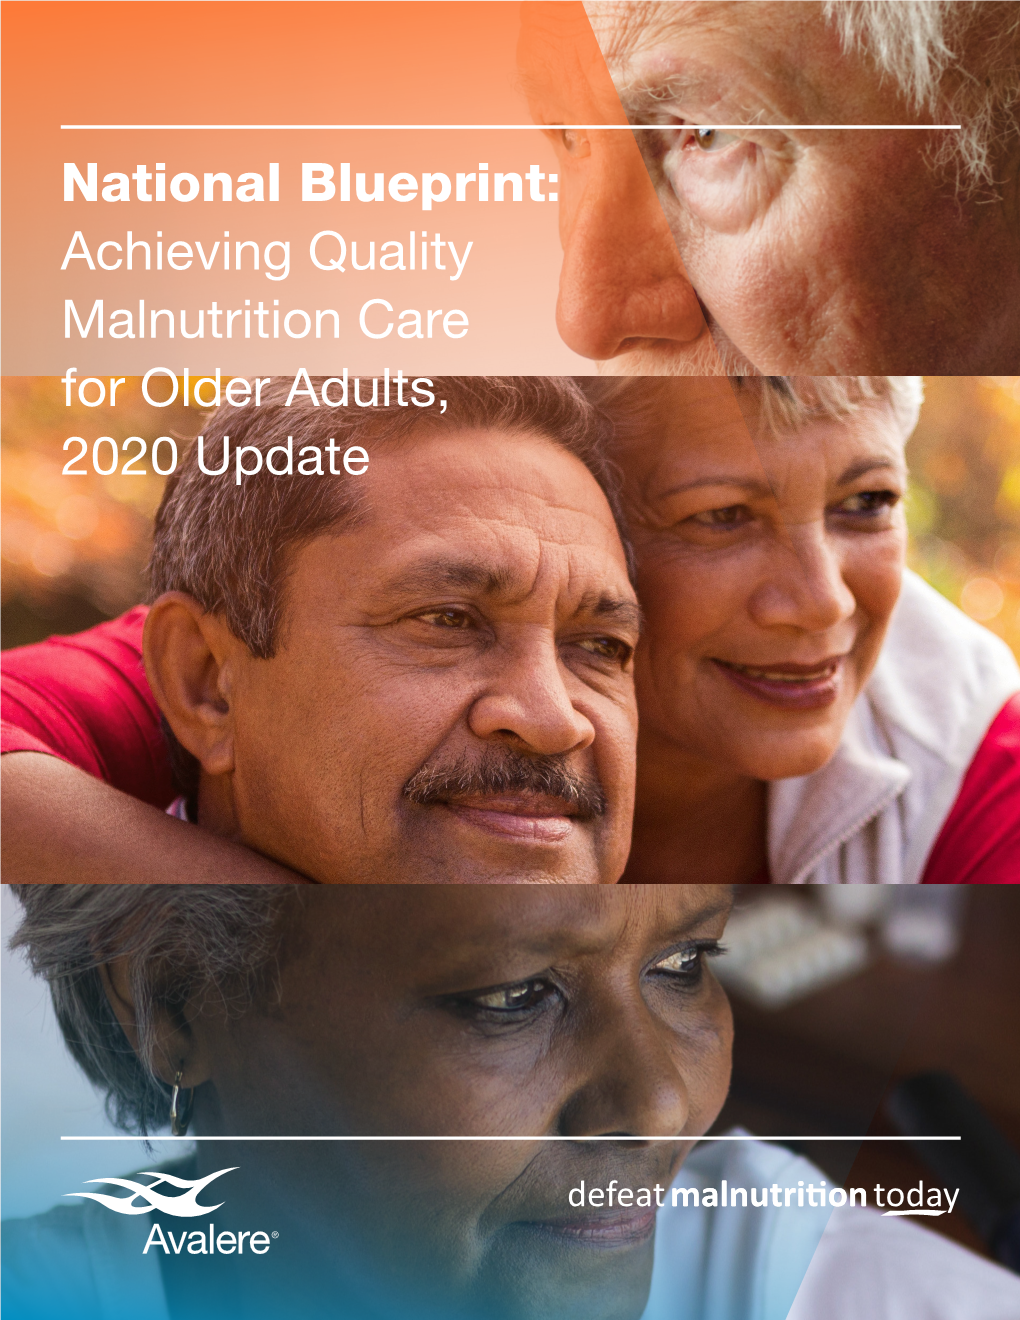 National Blueprint: Achieving Quality Malnutrition Care for Older Adults, 2020 Update Foreword